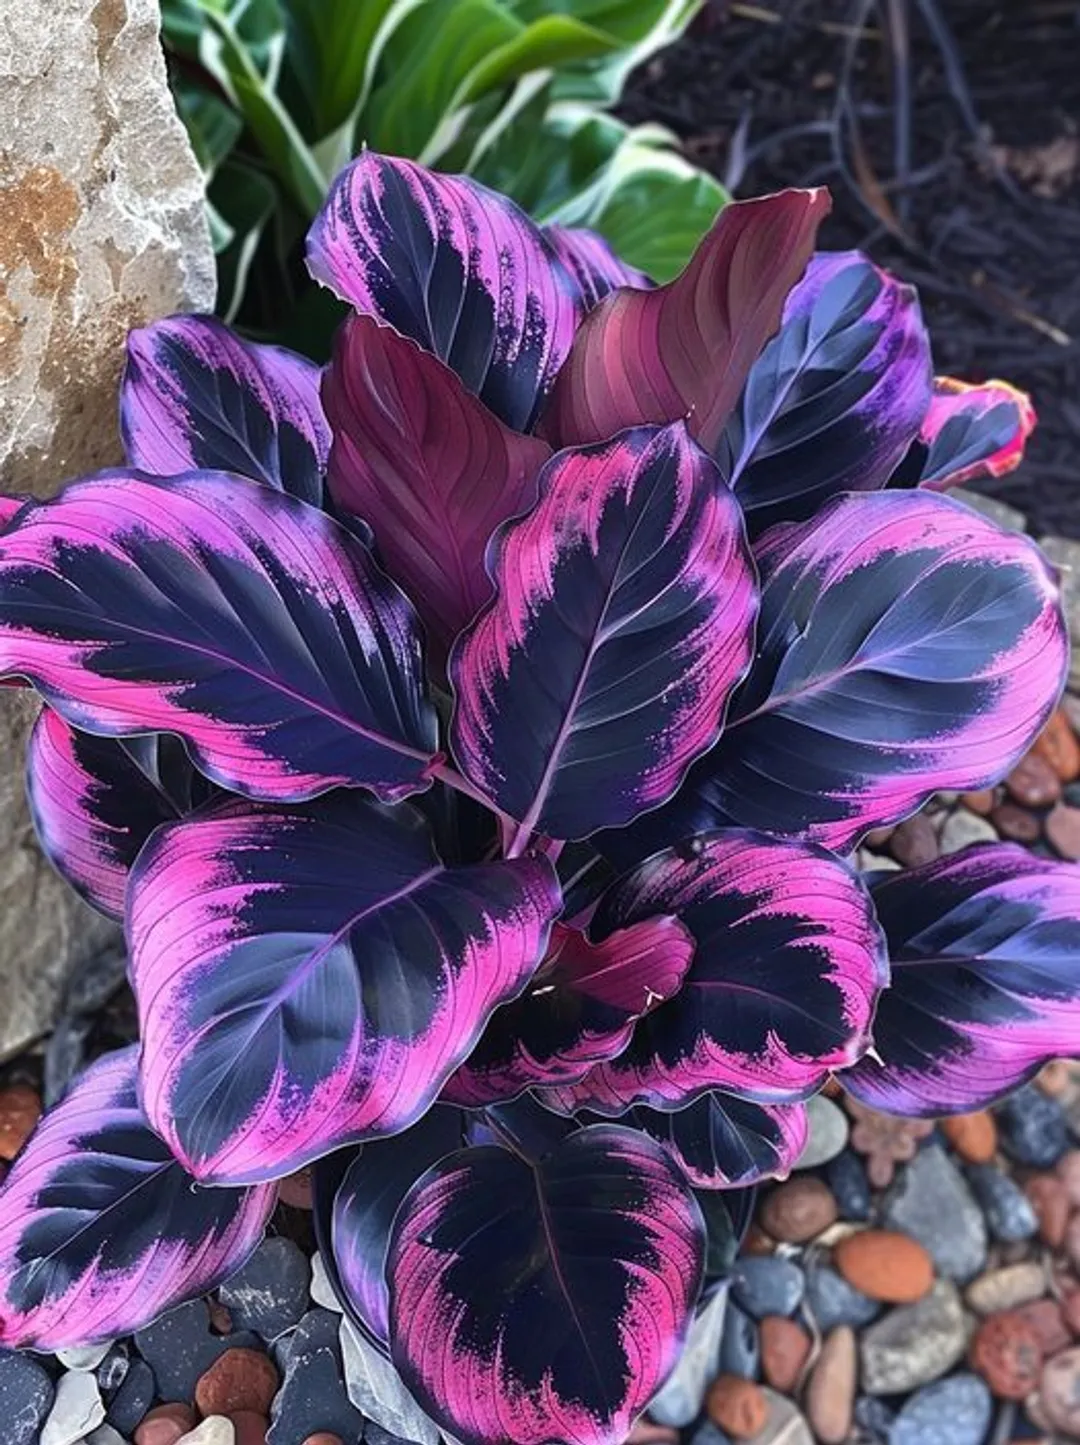 Purple Tip Calathea Couture 25 seeds per pack recomended - $10.25